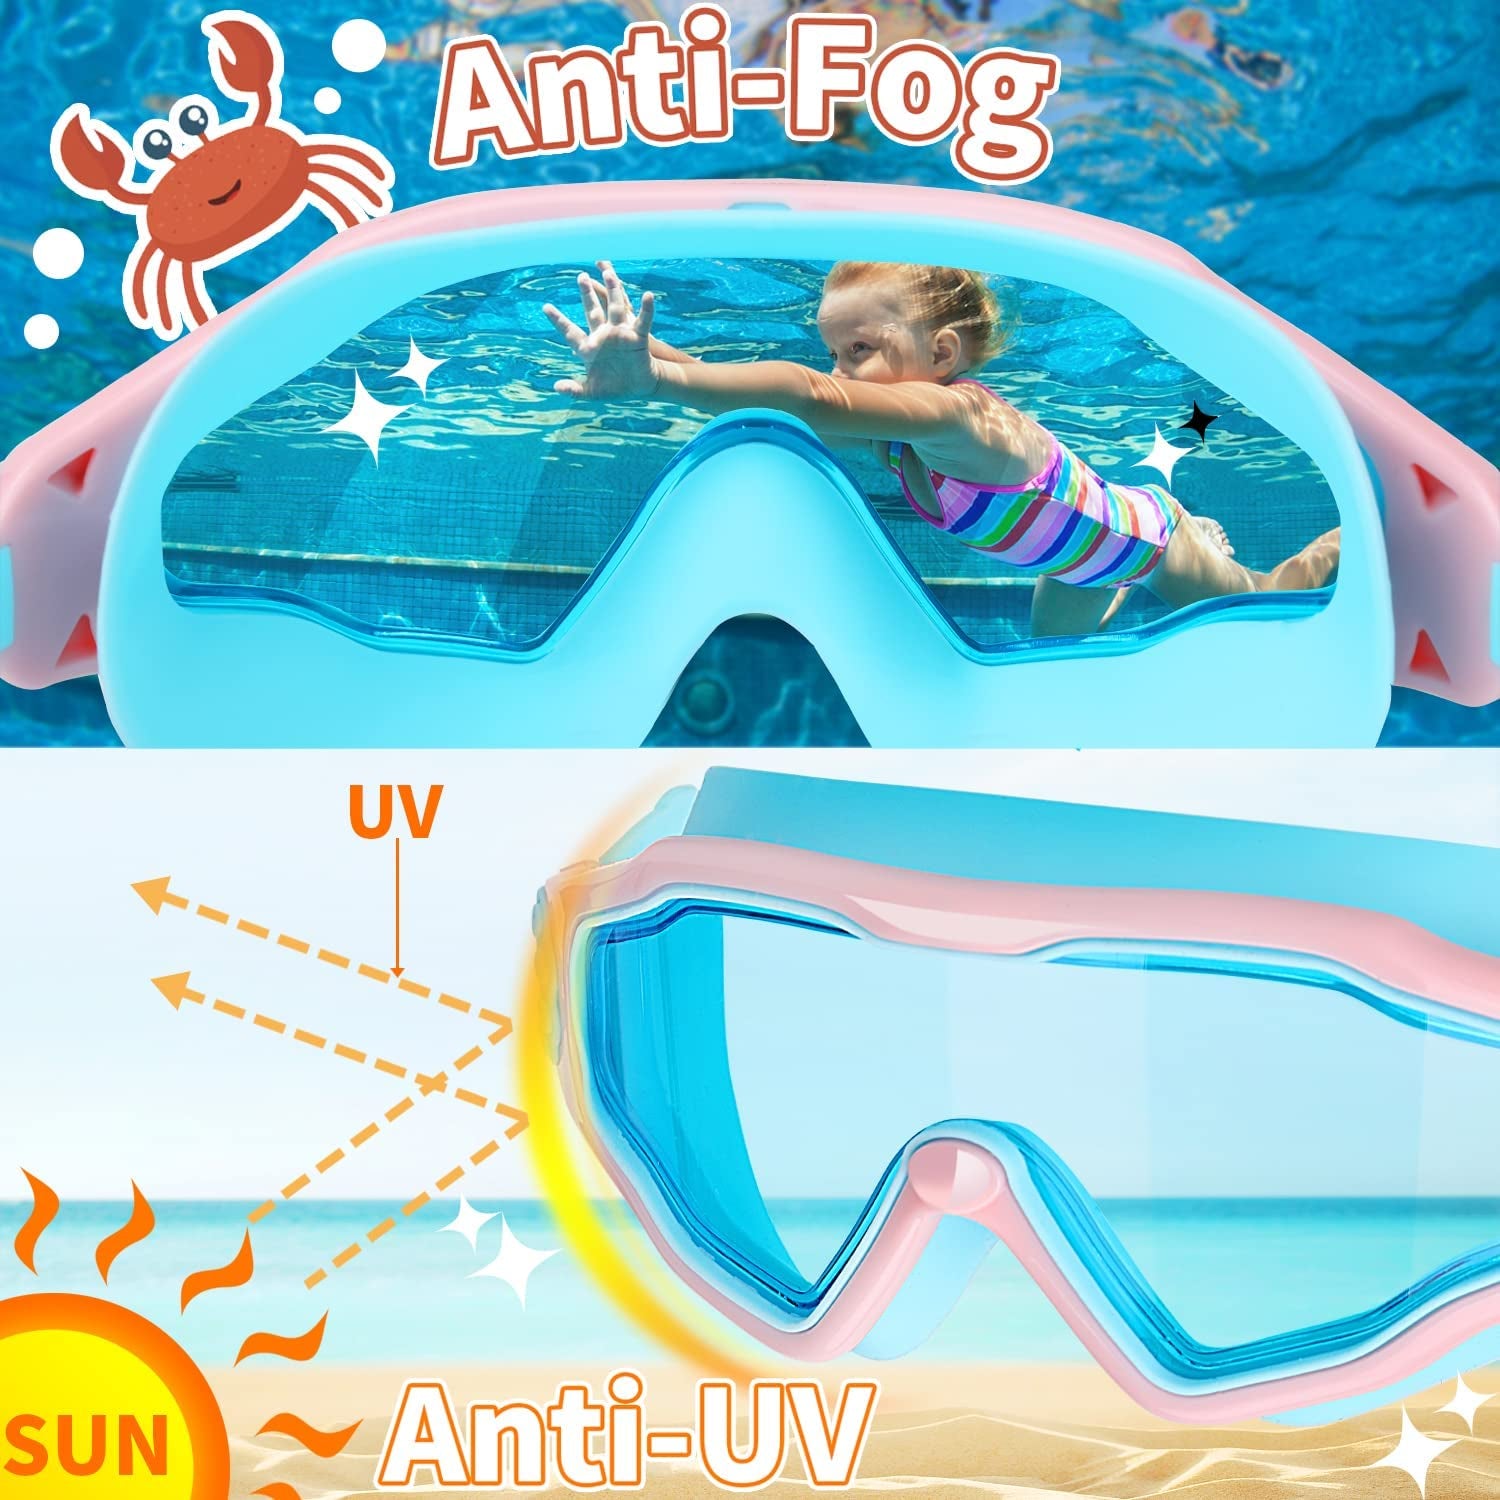 2-Pack Kids Swim Goggles, Wide View Swimming Goggles for Kids, Child, Boys or Girls from 3-15, Anti-Fog, Waterproof